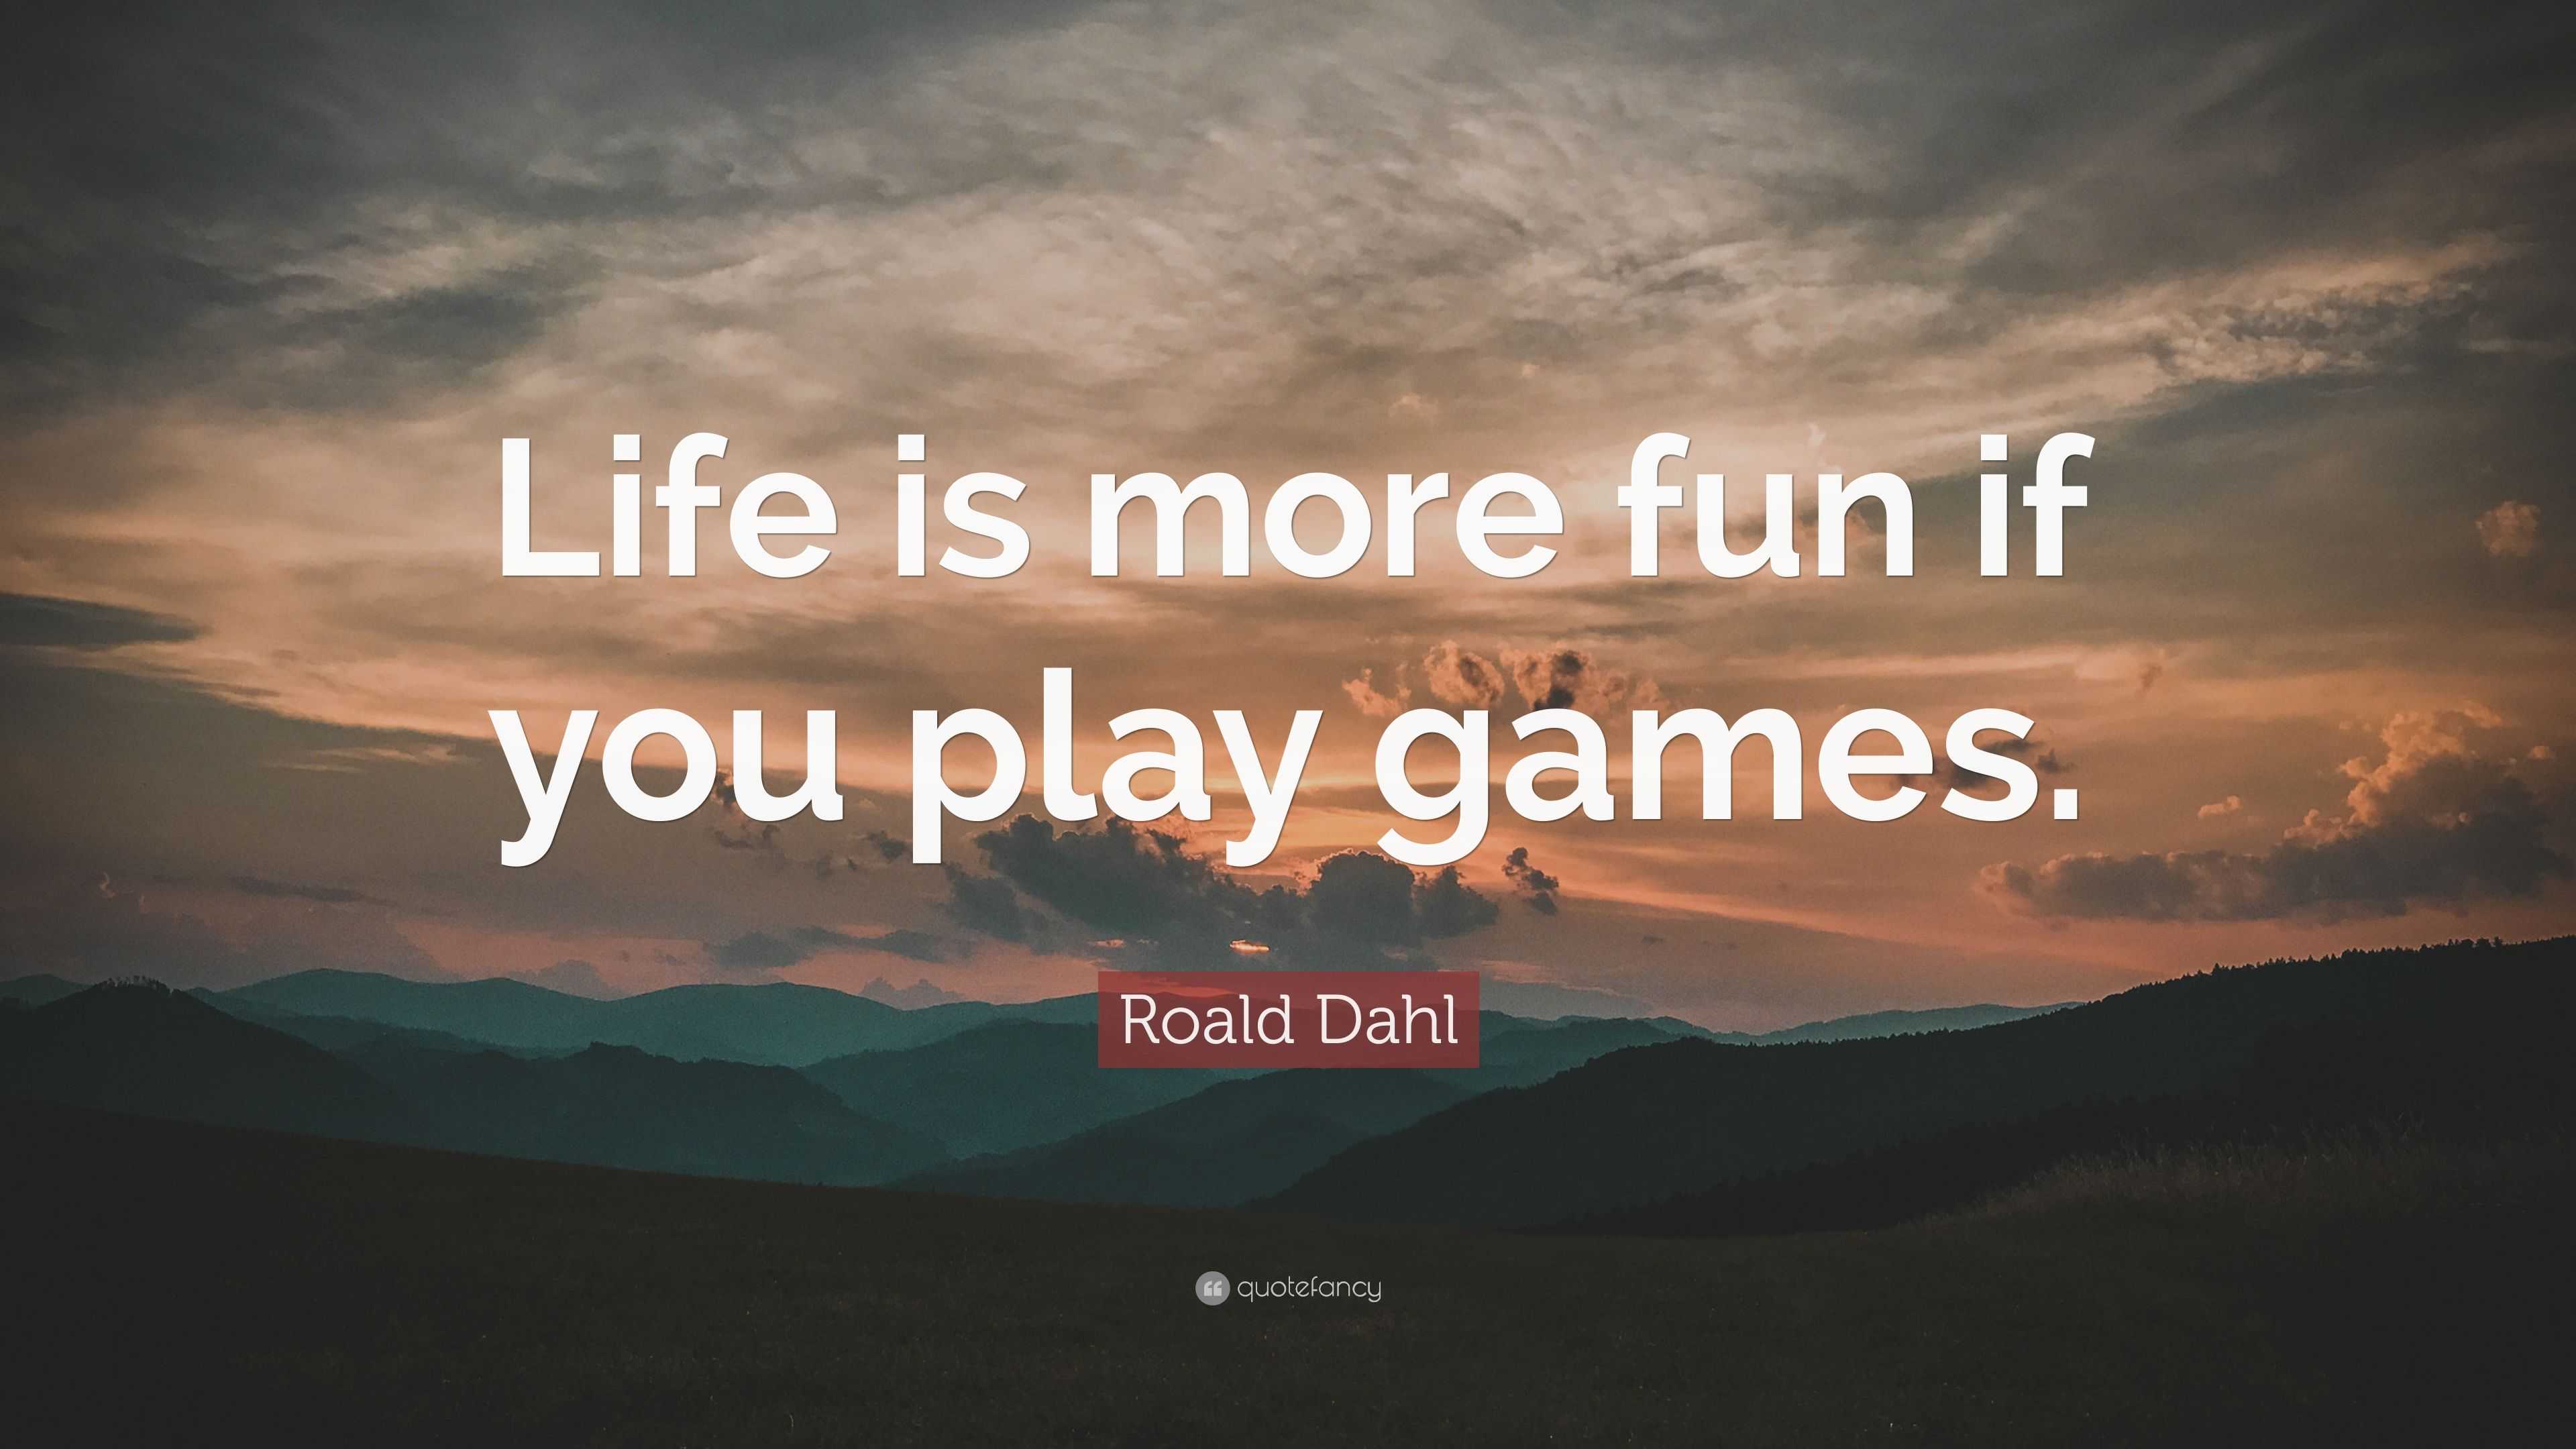 The game of life quotes - mytevideos